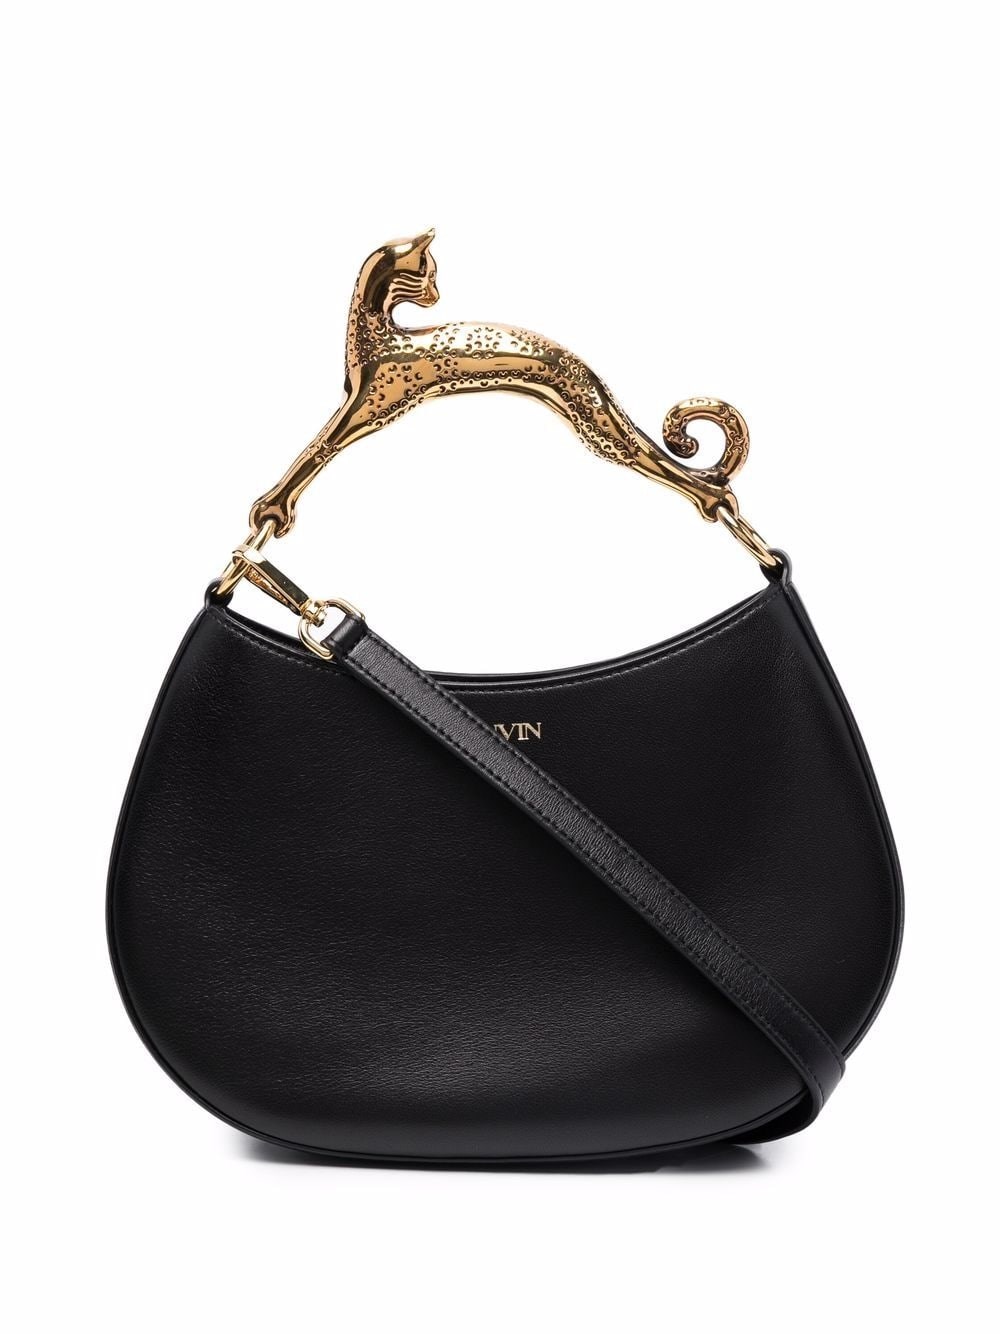 Lanvin Tote Bag With Decoration In Black